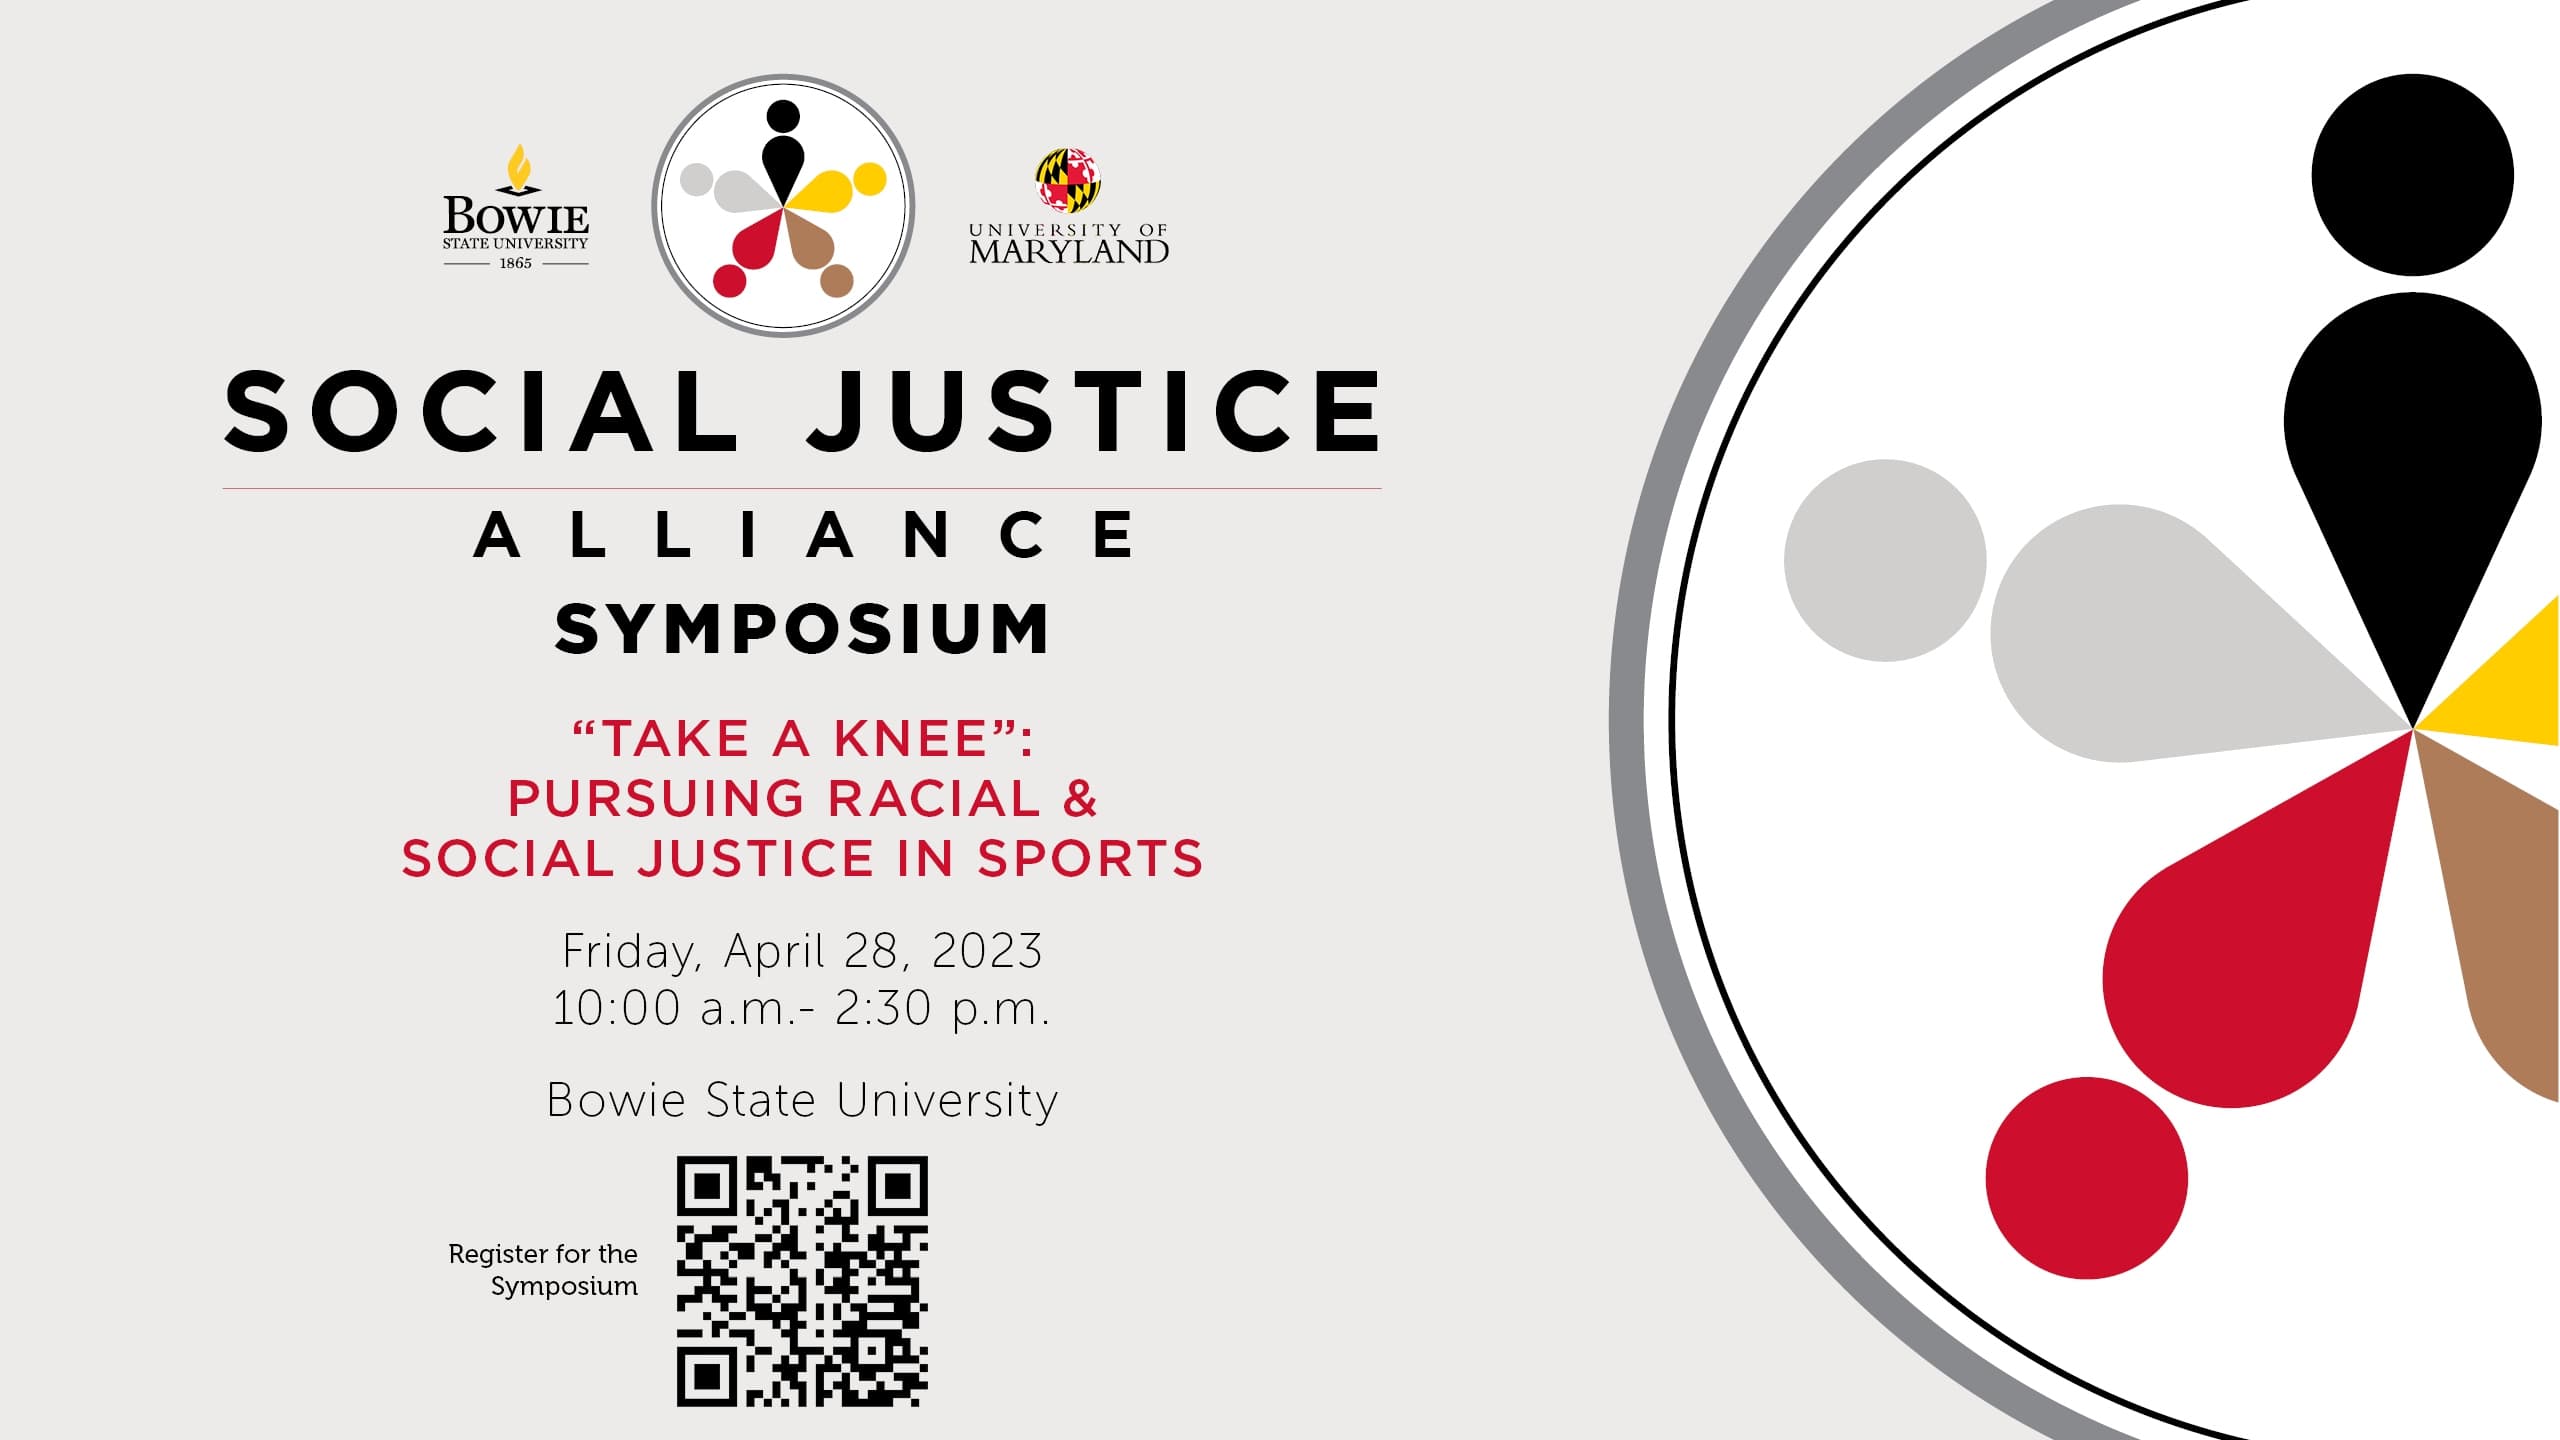 Social Justice Alliance logo and Symposium details